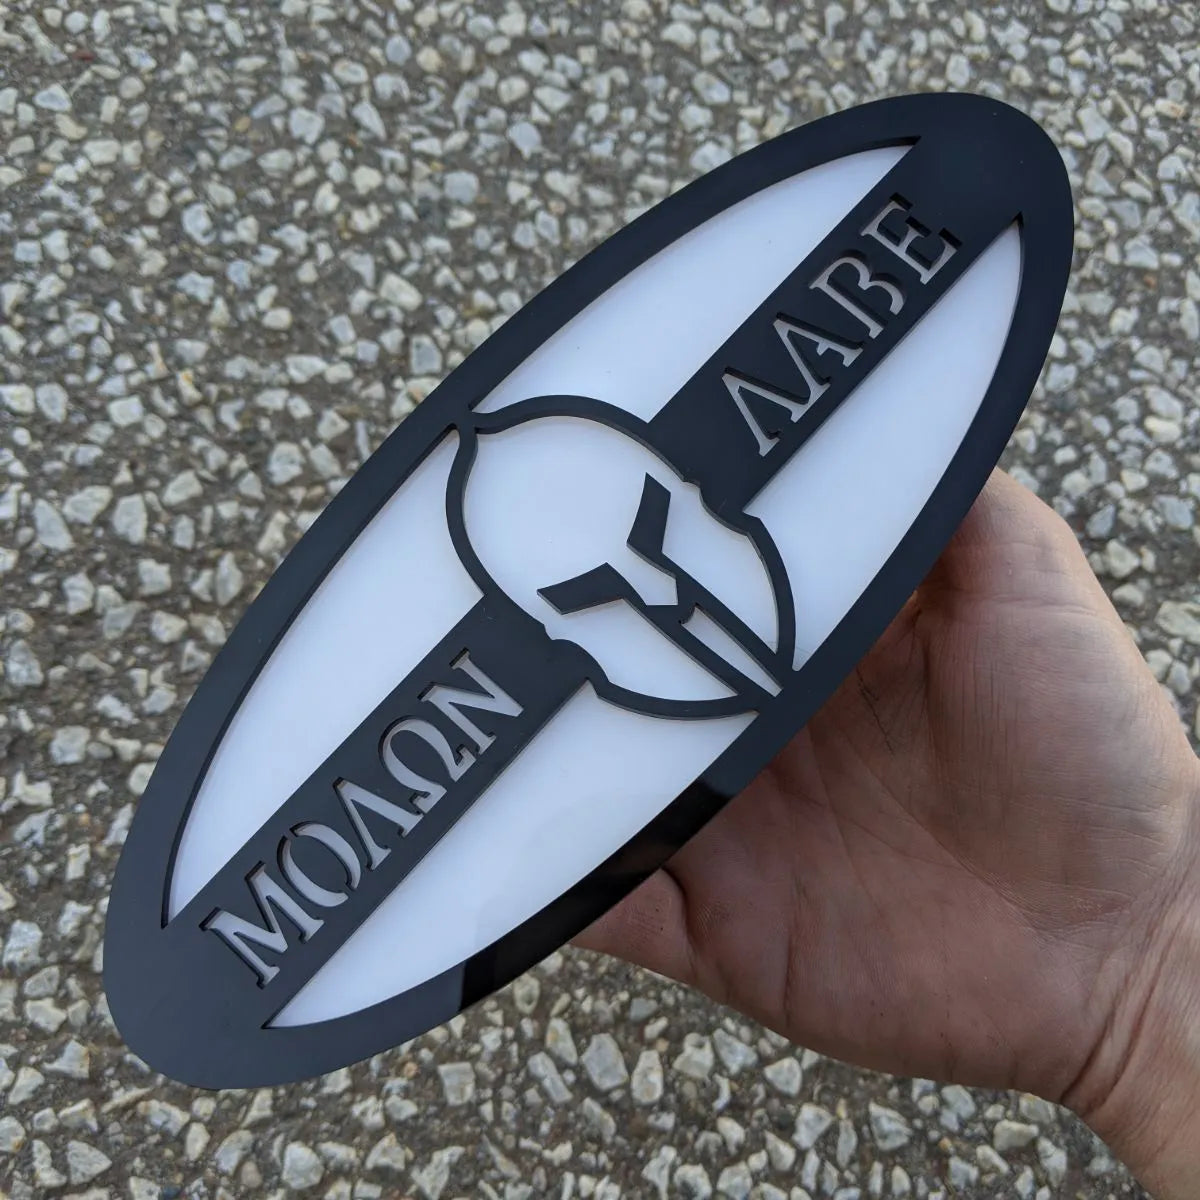 Molon Labe Oval Badge - 9 inch - Black on White (Multiple Vehicles)